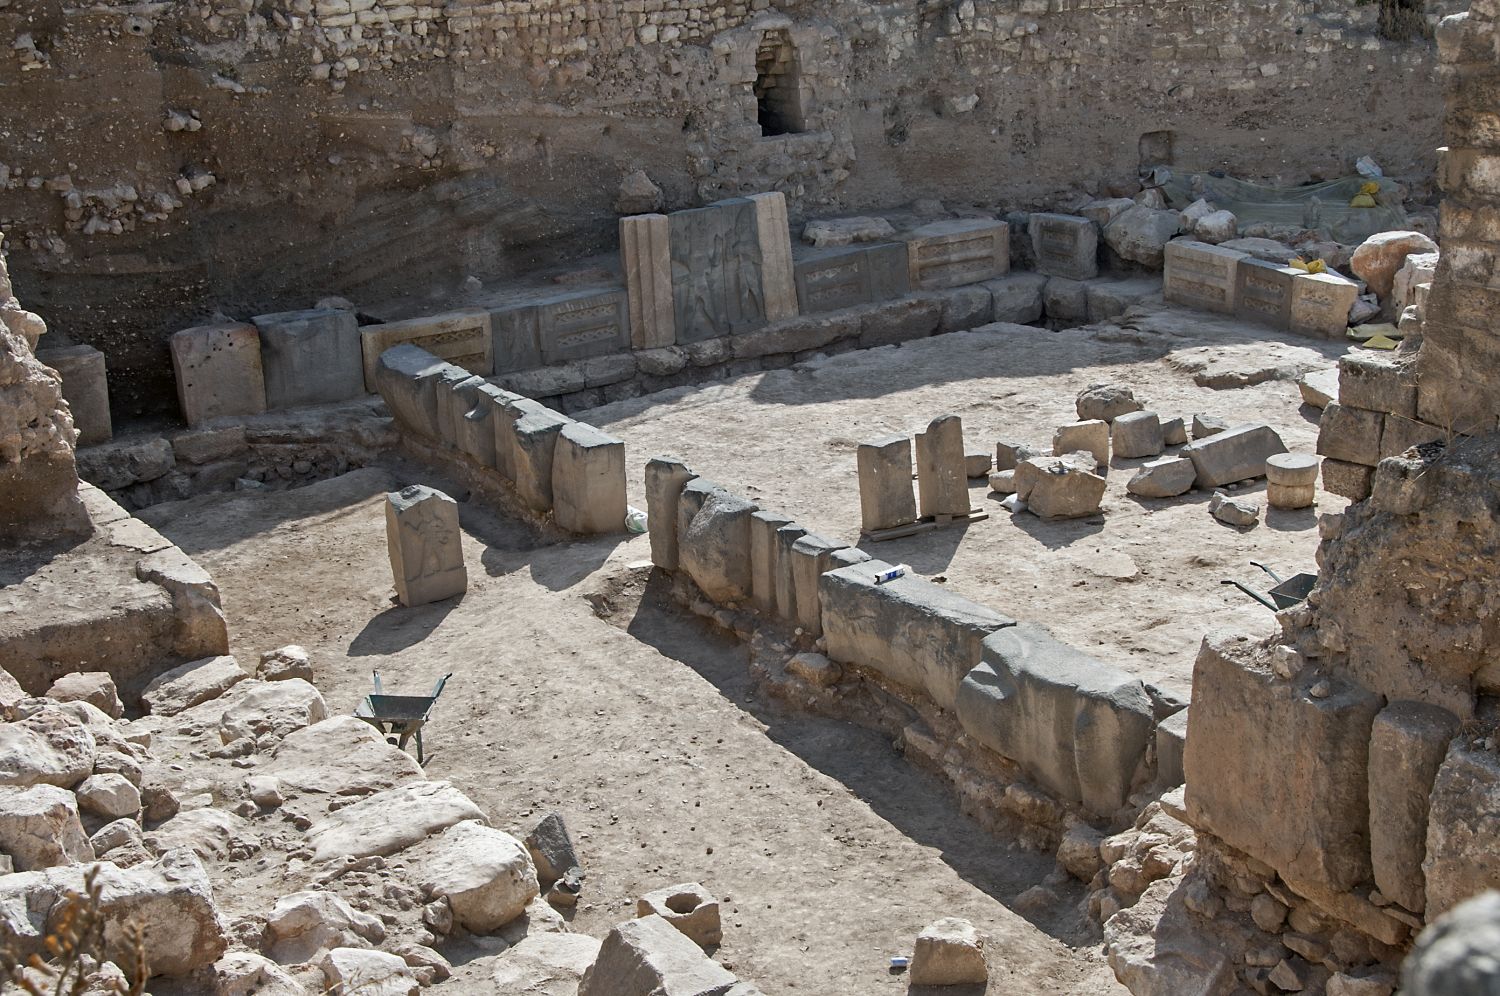 General view over excavated area facing southeast. Row of panels from platform wall constructed ca. 900 BCE visible in center.